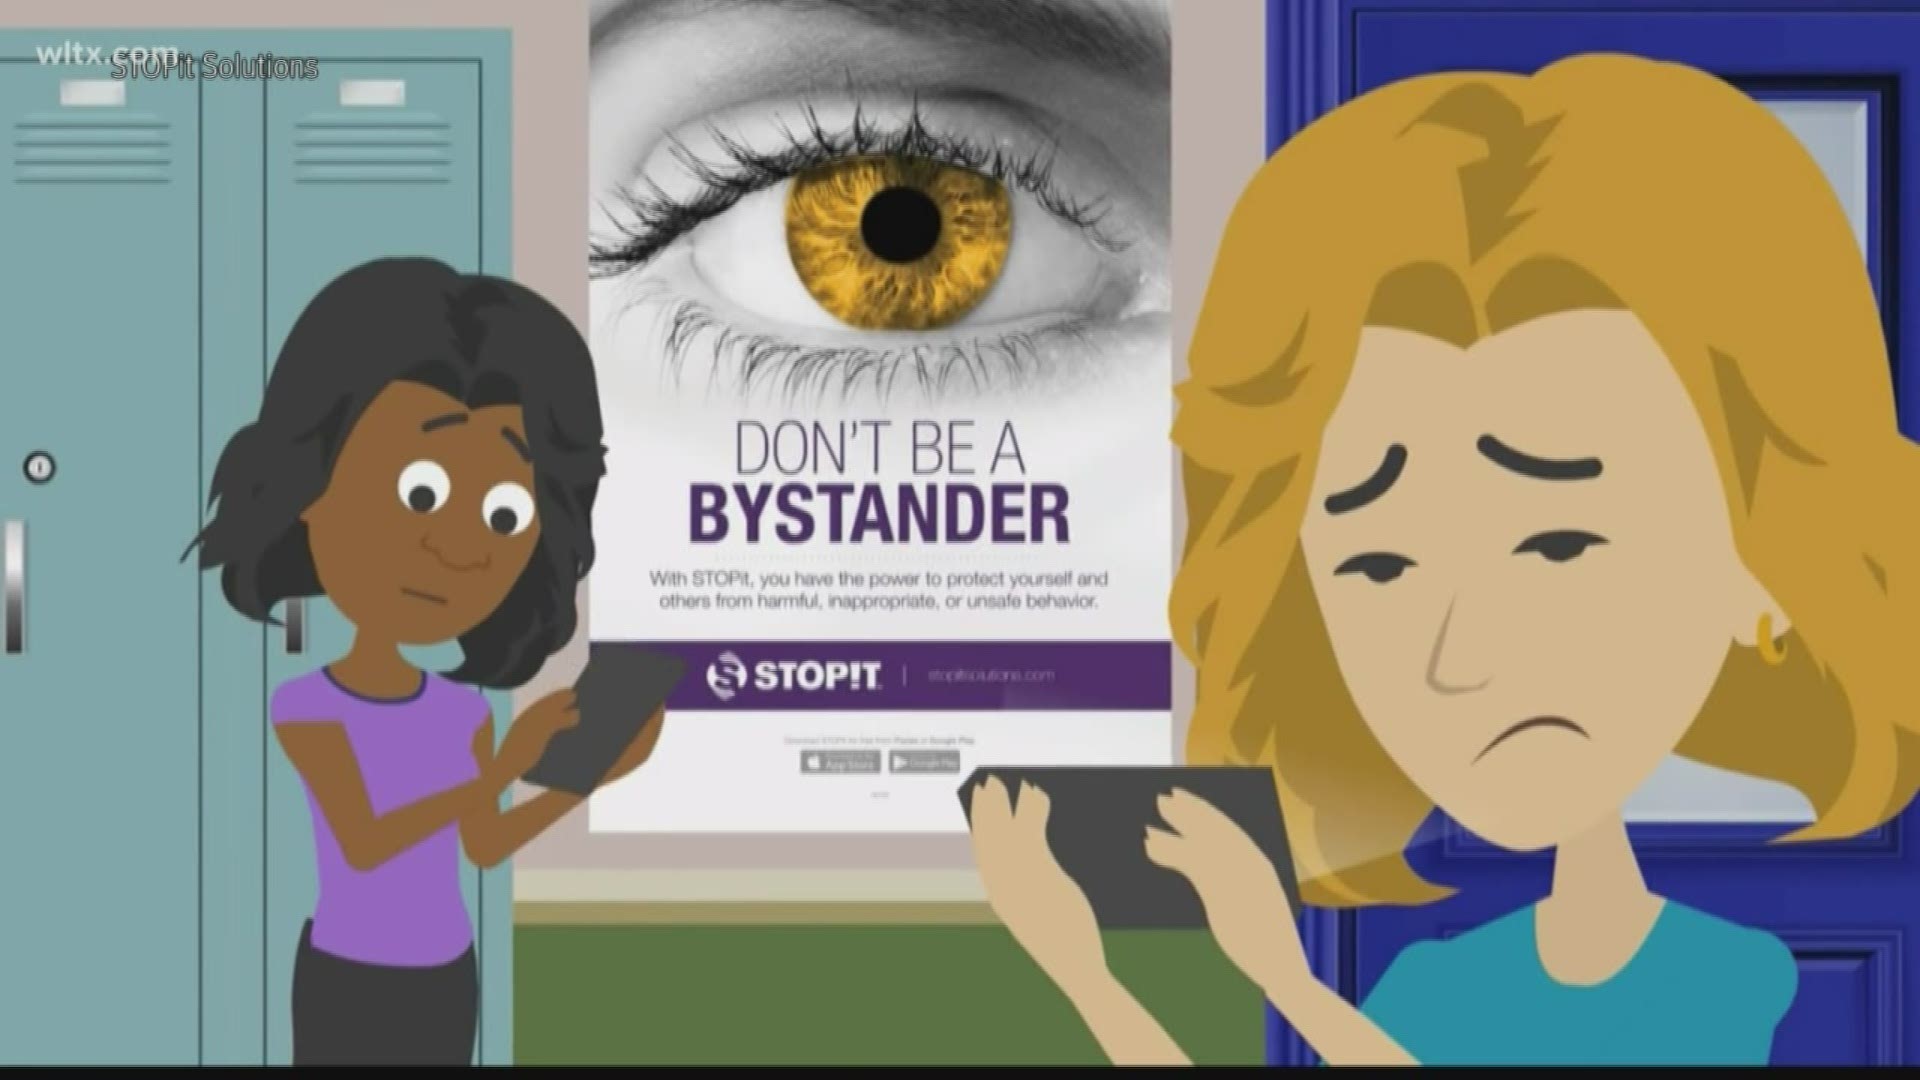 Using STOPit, students can anonymously report suspicious activity, bullying, threats and mental health concerns.